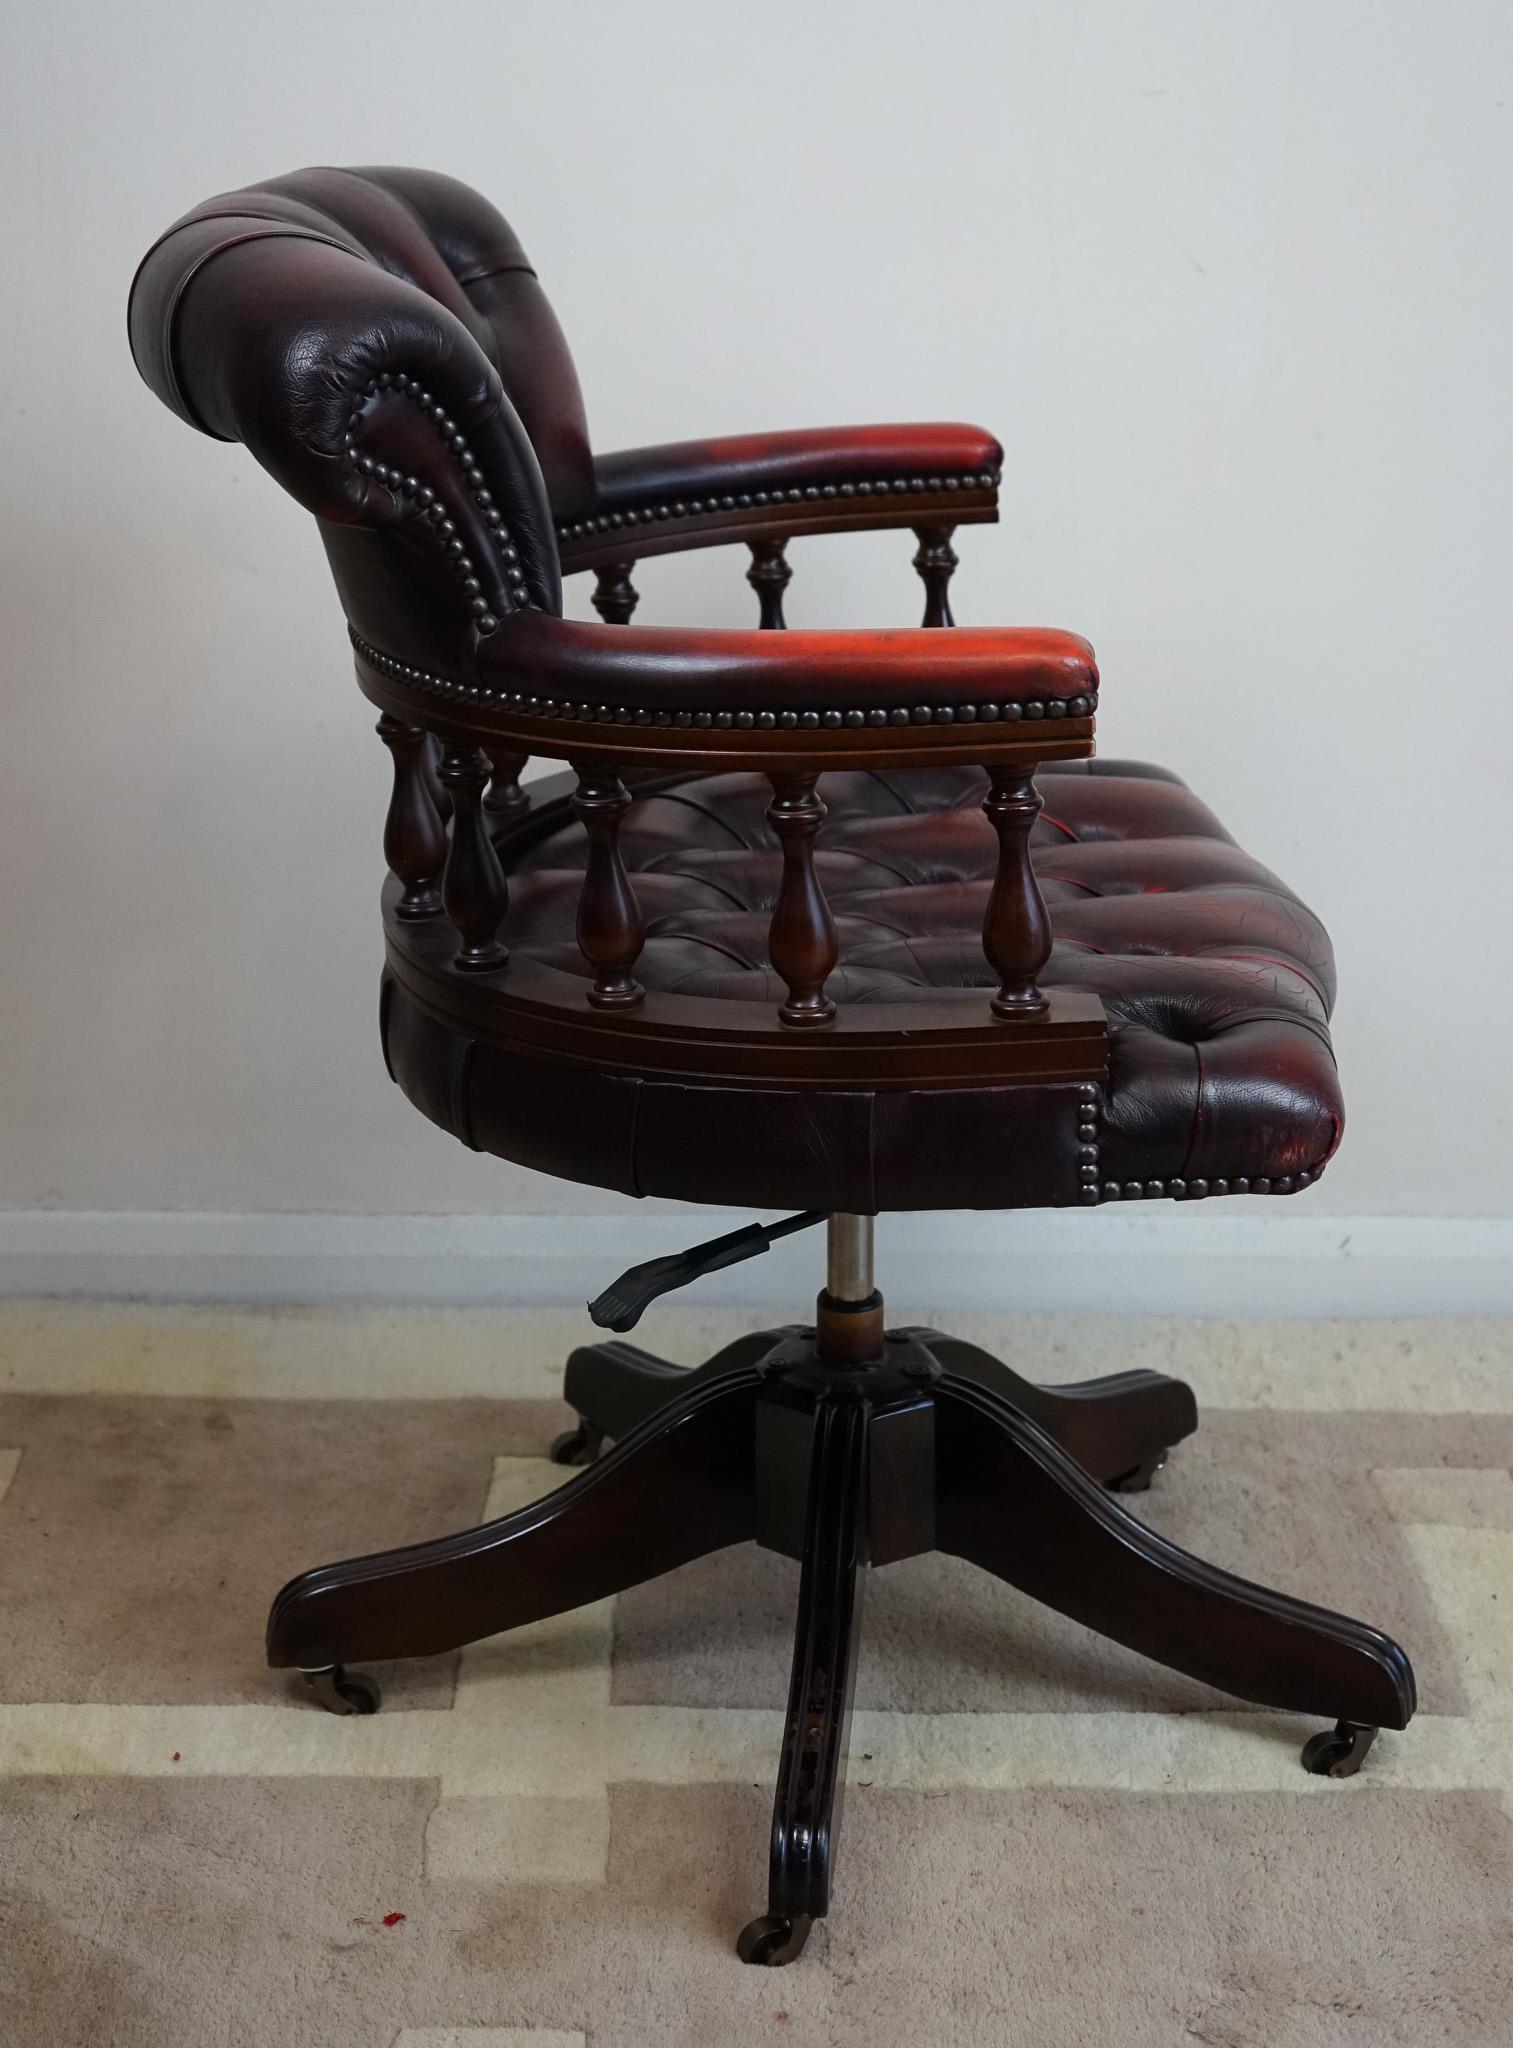 Captain's oak Swivel Desk Chair.
For sale a late 20th century beautiful mahogany revolving tub back desk chair, upholstered in buttoned claret leather, in good condition!
Don't hesitate to contact me if you have any questions.
Please have a closer